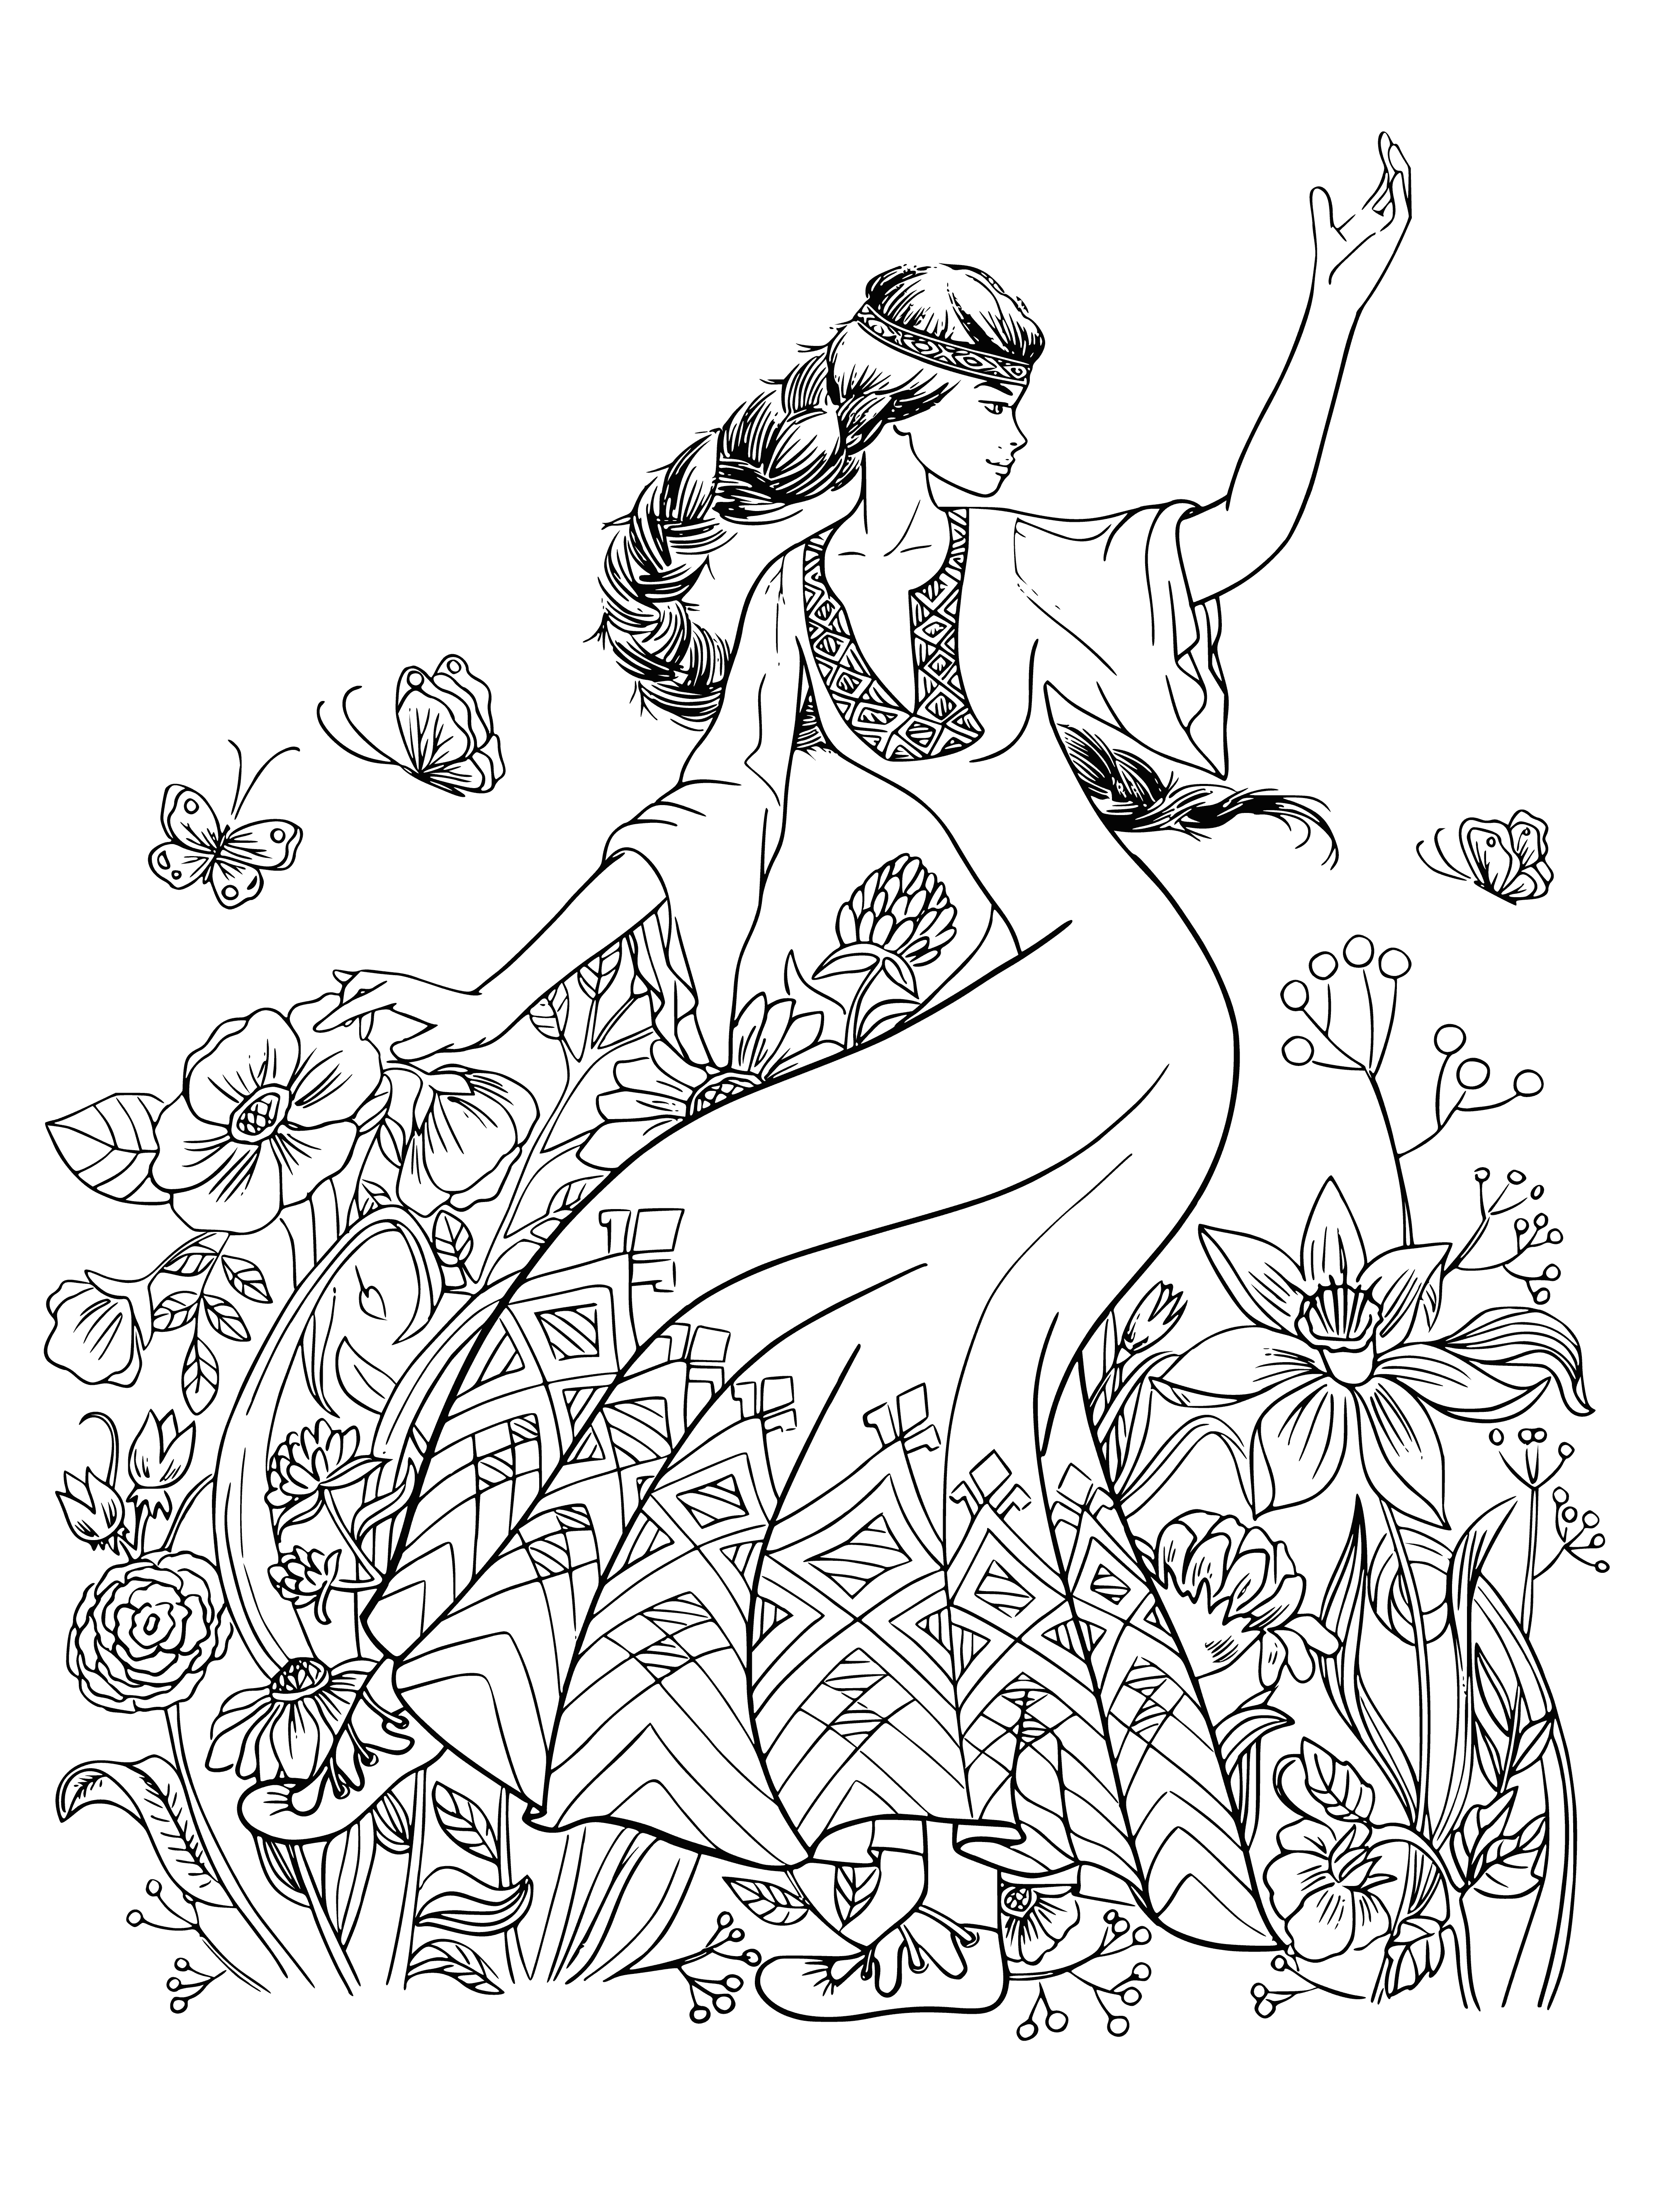 coloring page: Girls in traditional Slavic clothing dancing in a circle, excitedly enjoying the moment. #traditions #joy